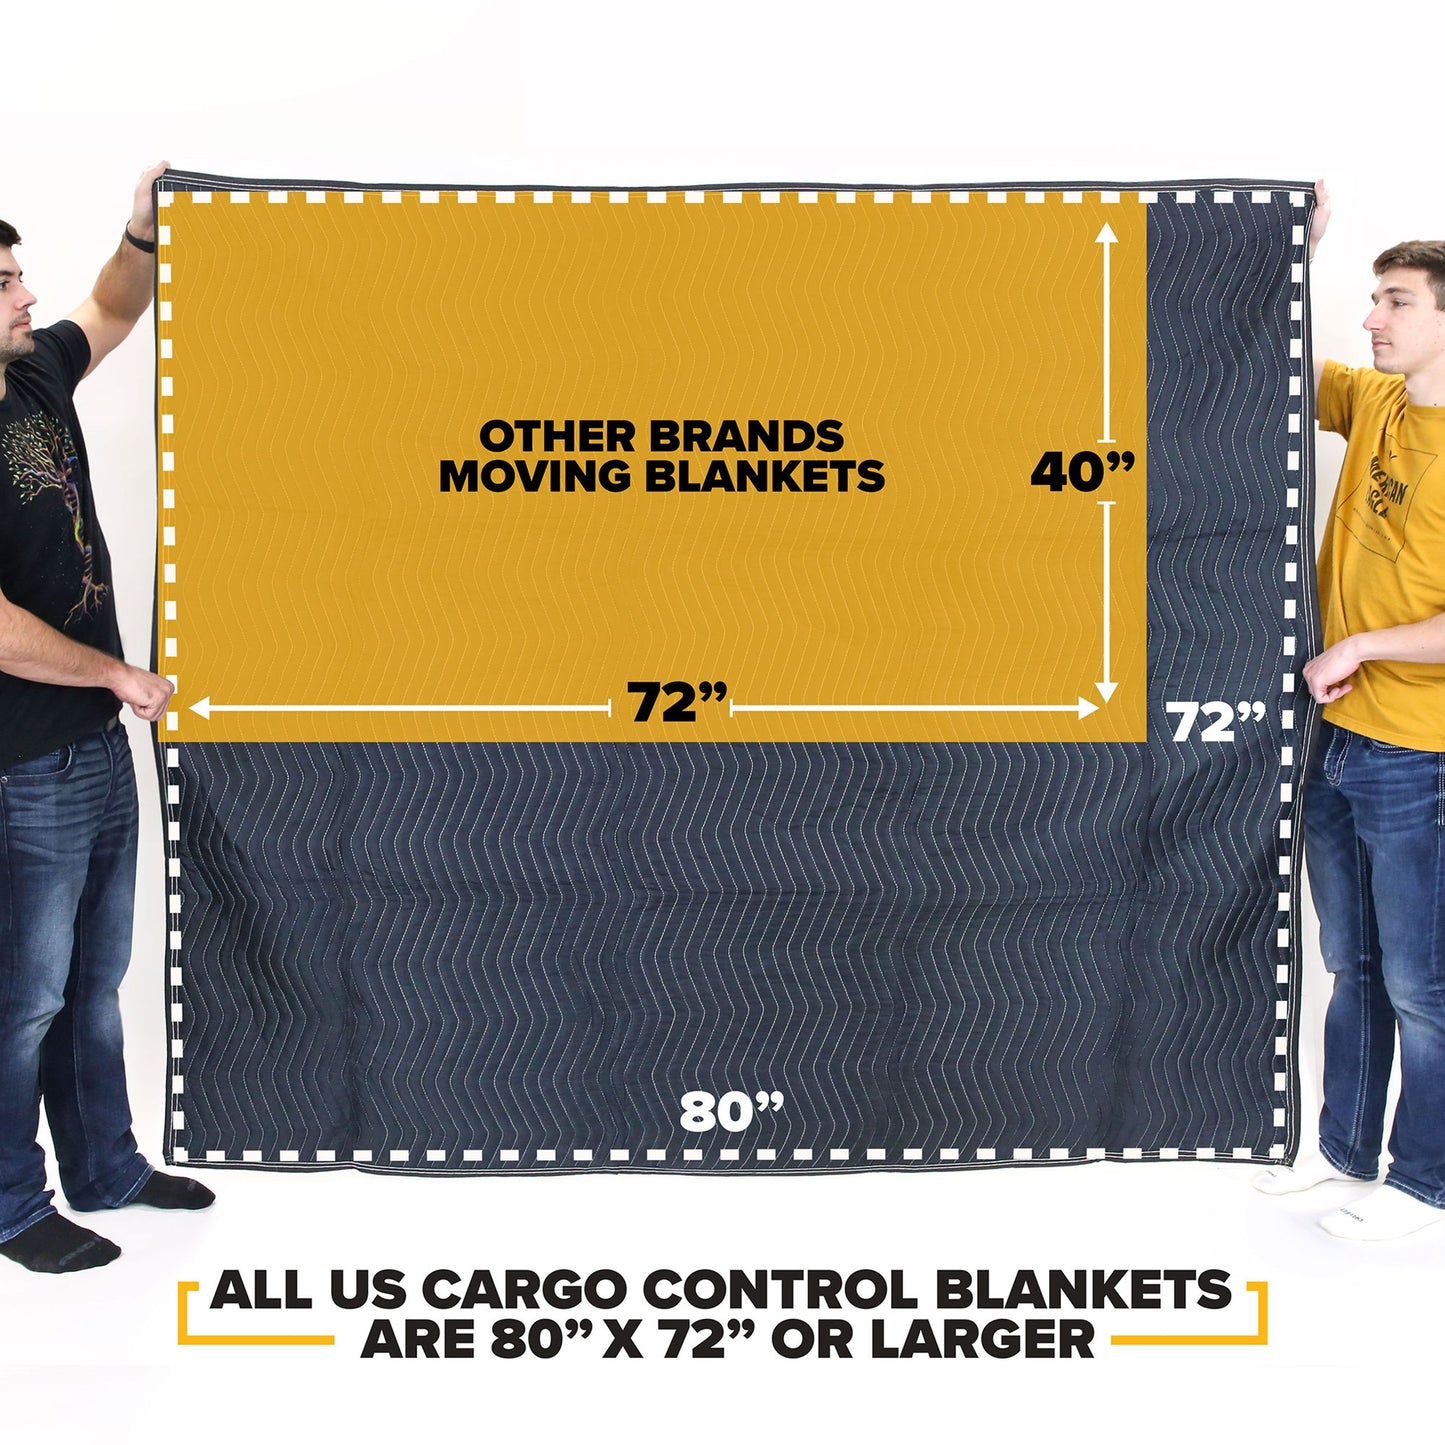 Moving Blankets- Econo Mover 4-Pack image 4 of 10